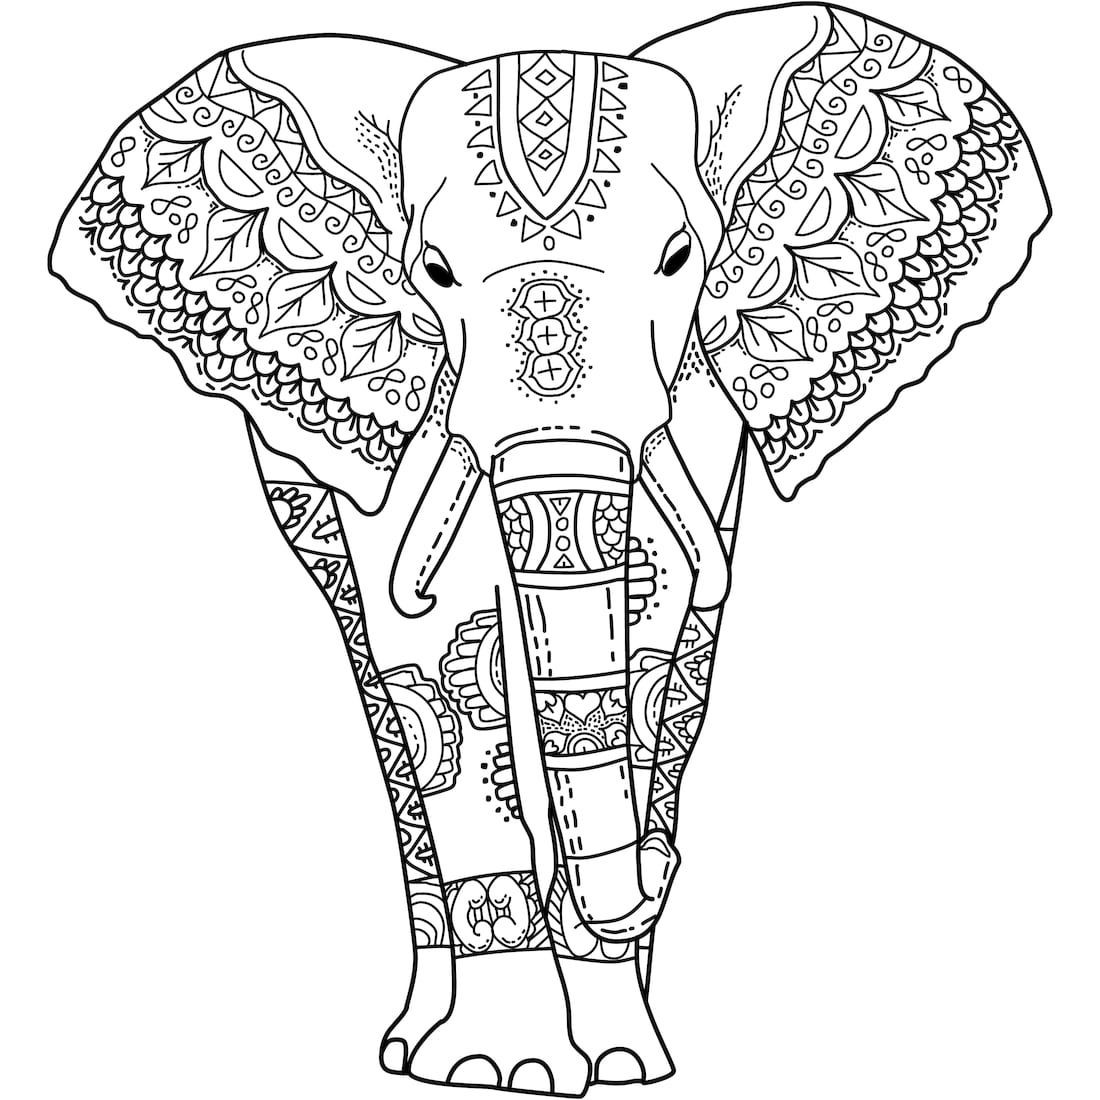 Adult Coloring Book Elephant
 Ganesha is one of the most well recognized deities in